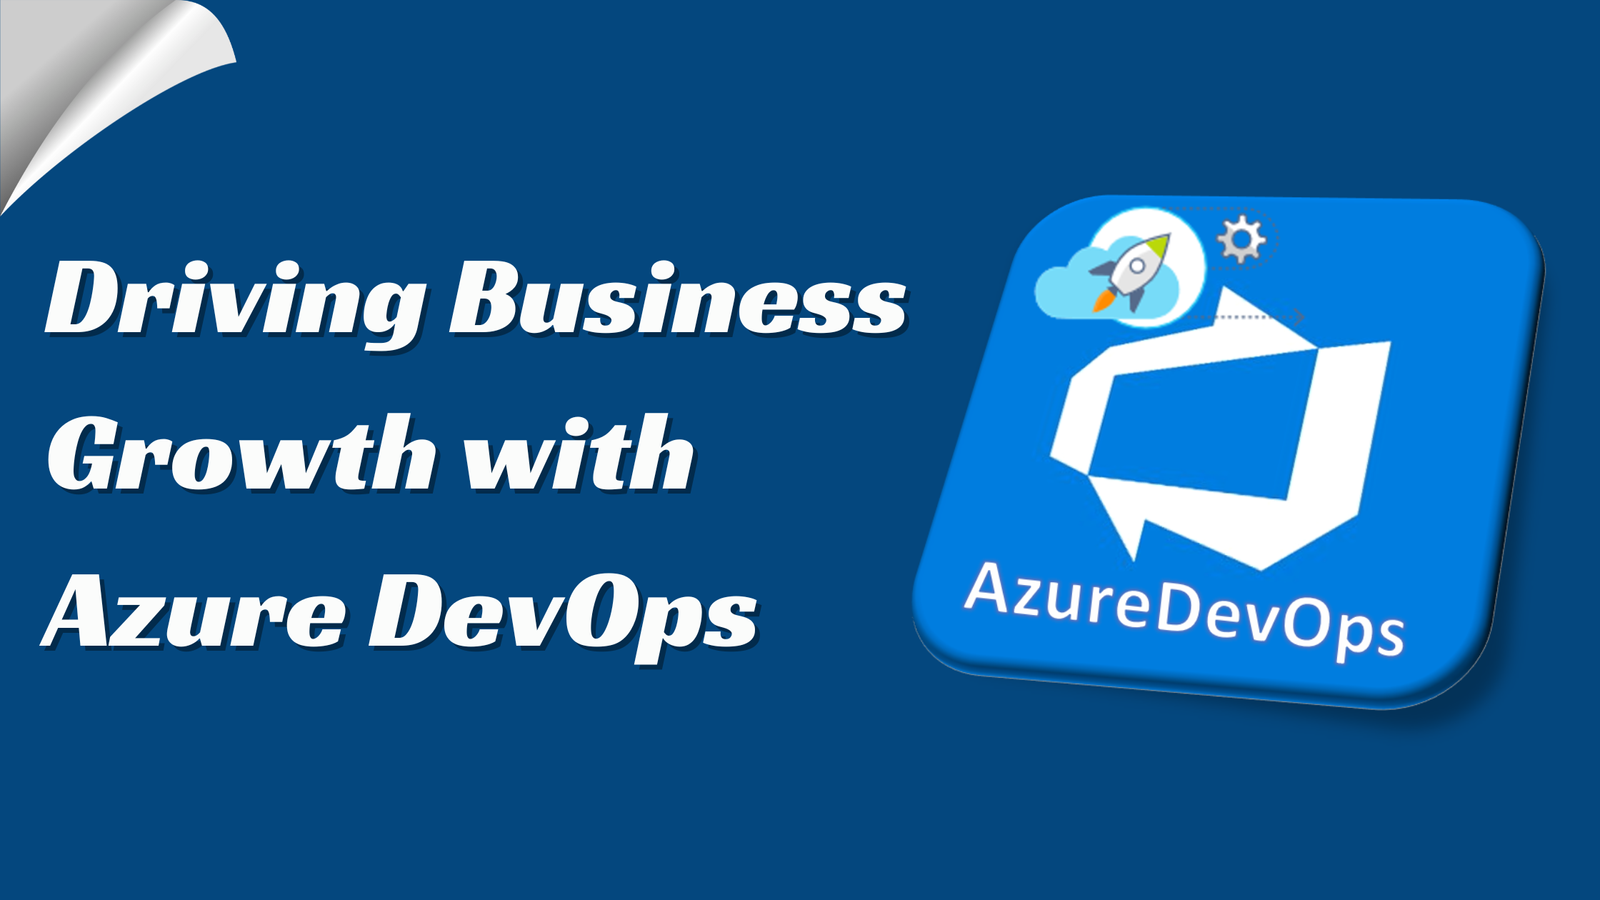 Driving Business Growth with Azure DevOps: Let’s Check Out